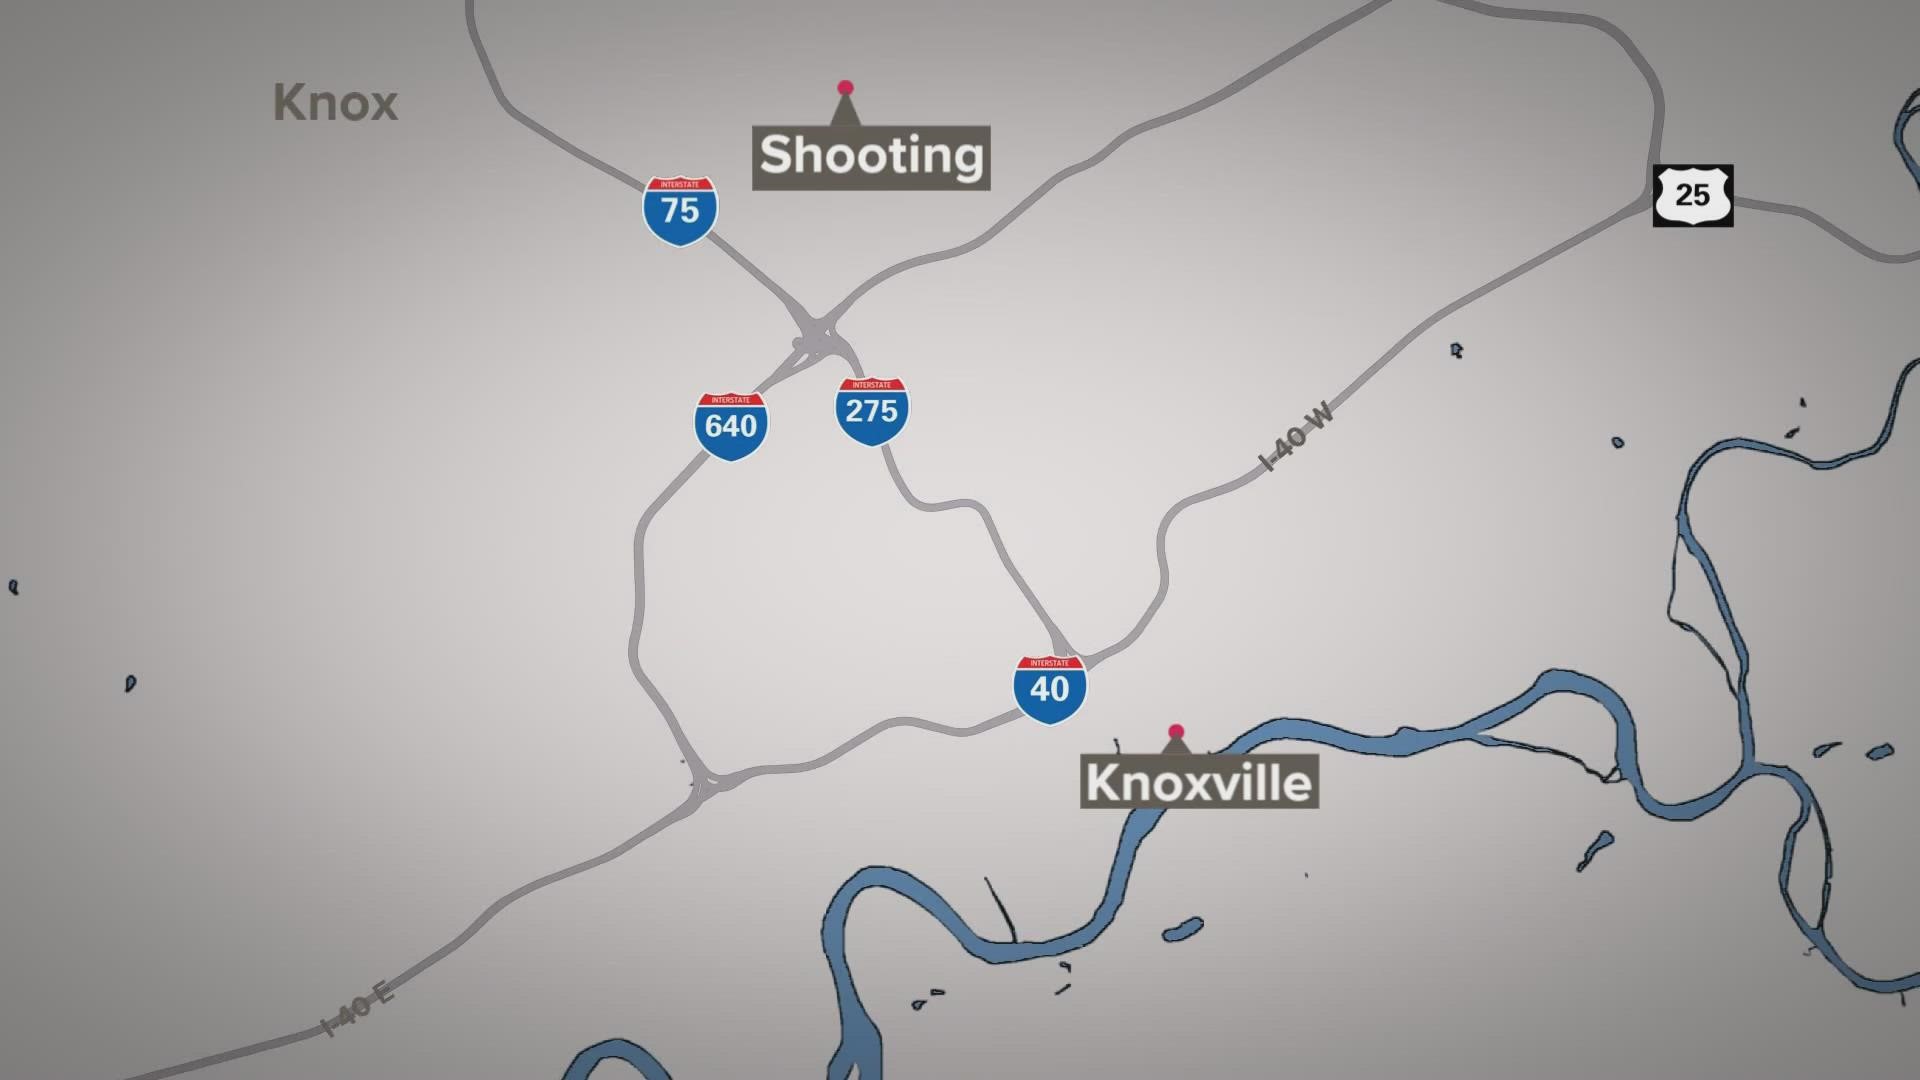 Knoxville Police said the shooting happened around 2:30 a.m. They responded to a home on West Parkway and found a man dead inside.